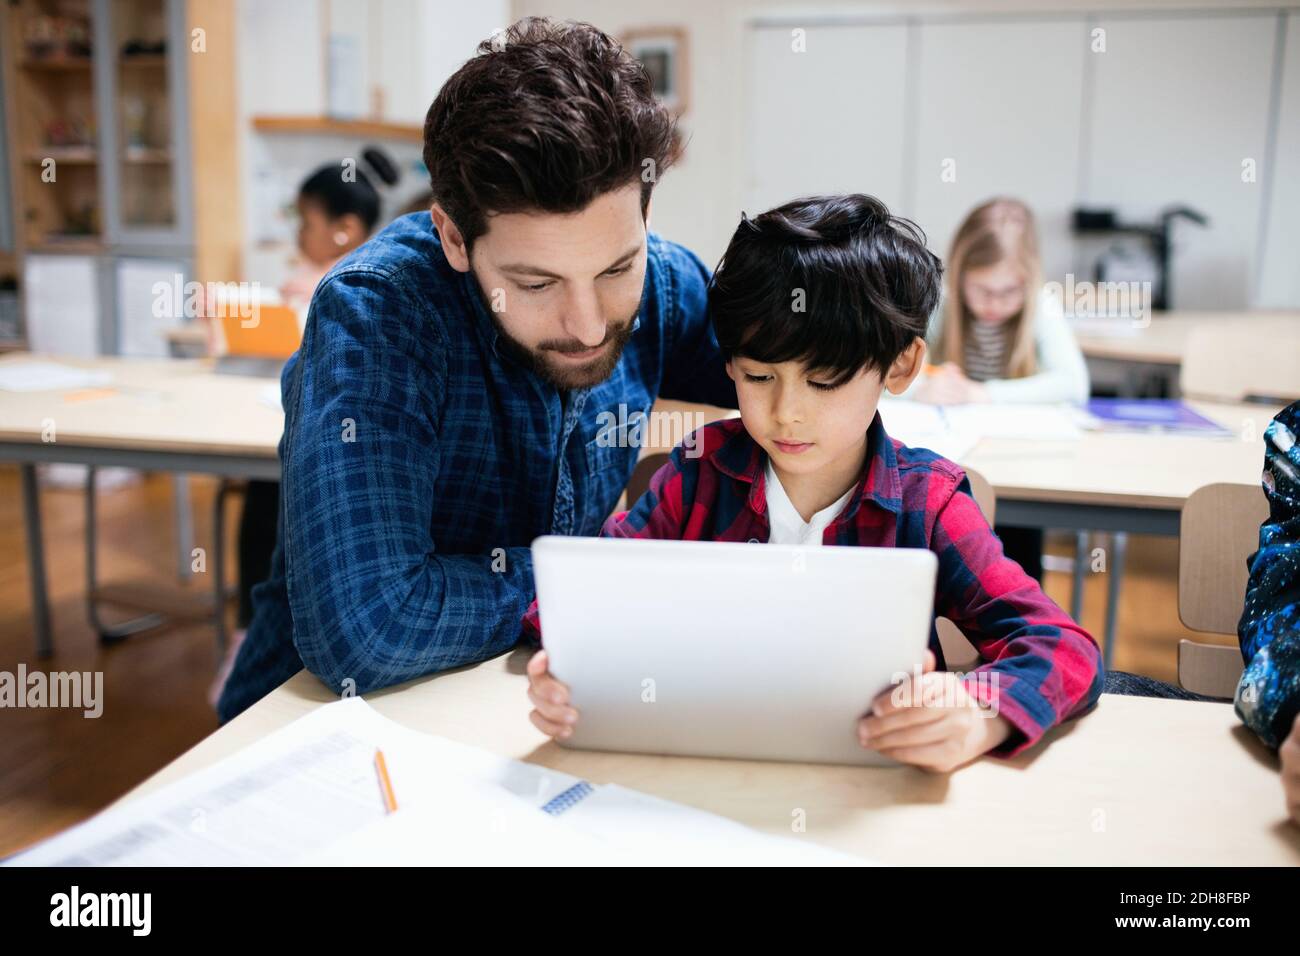 Teacher assisting male student in using digital tablet while sitting in classroom Stock Photo